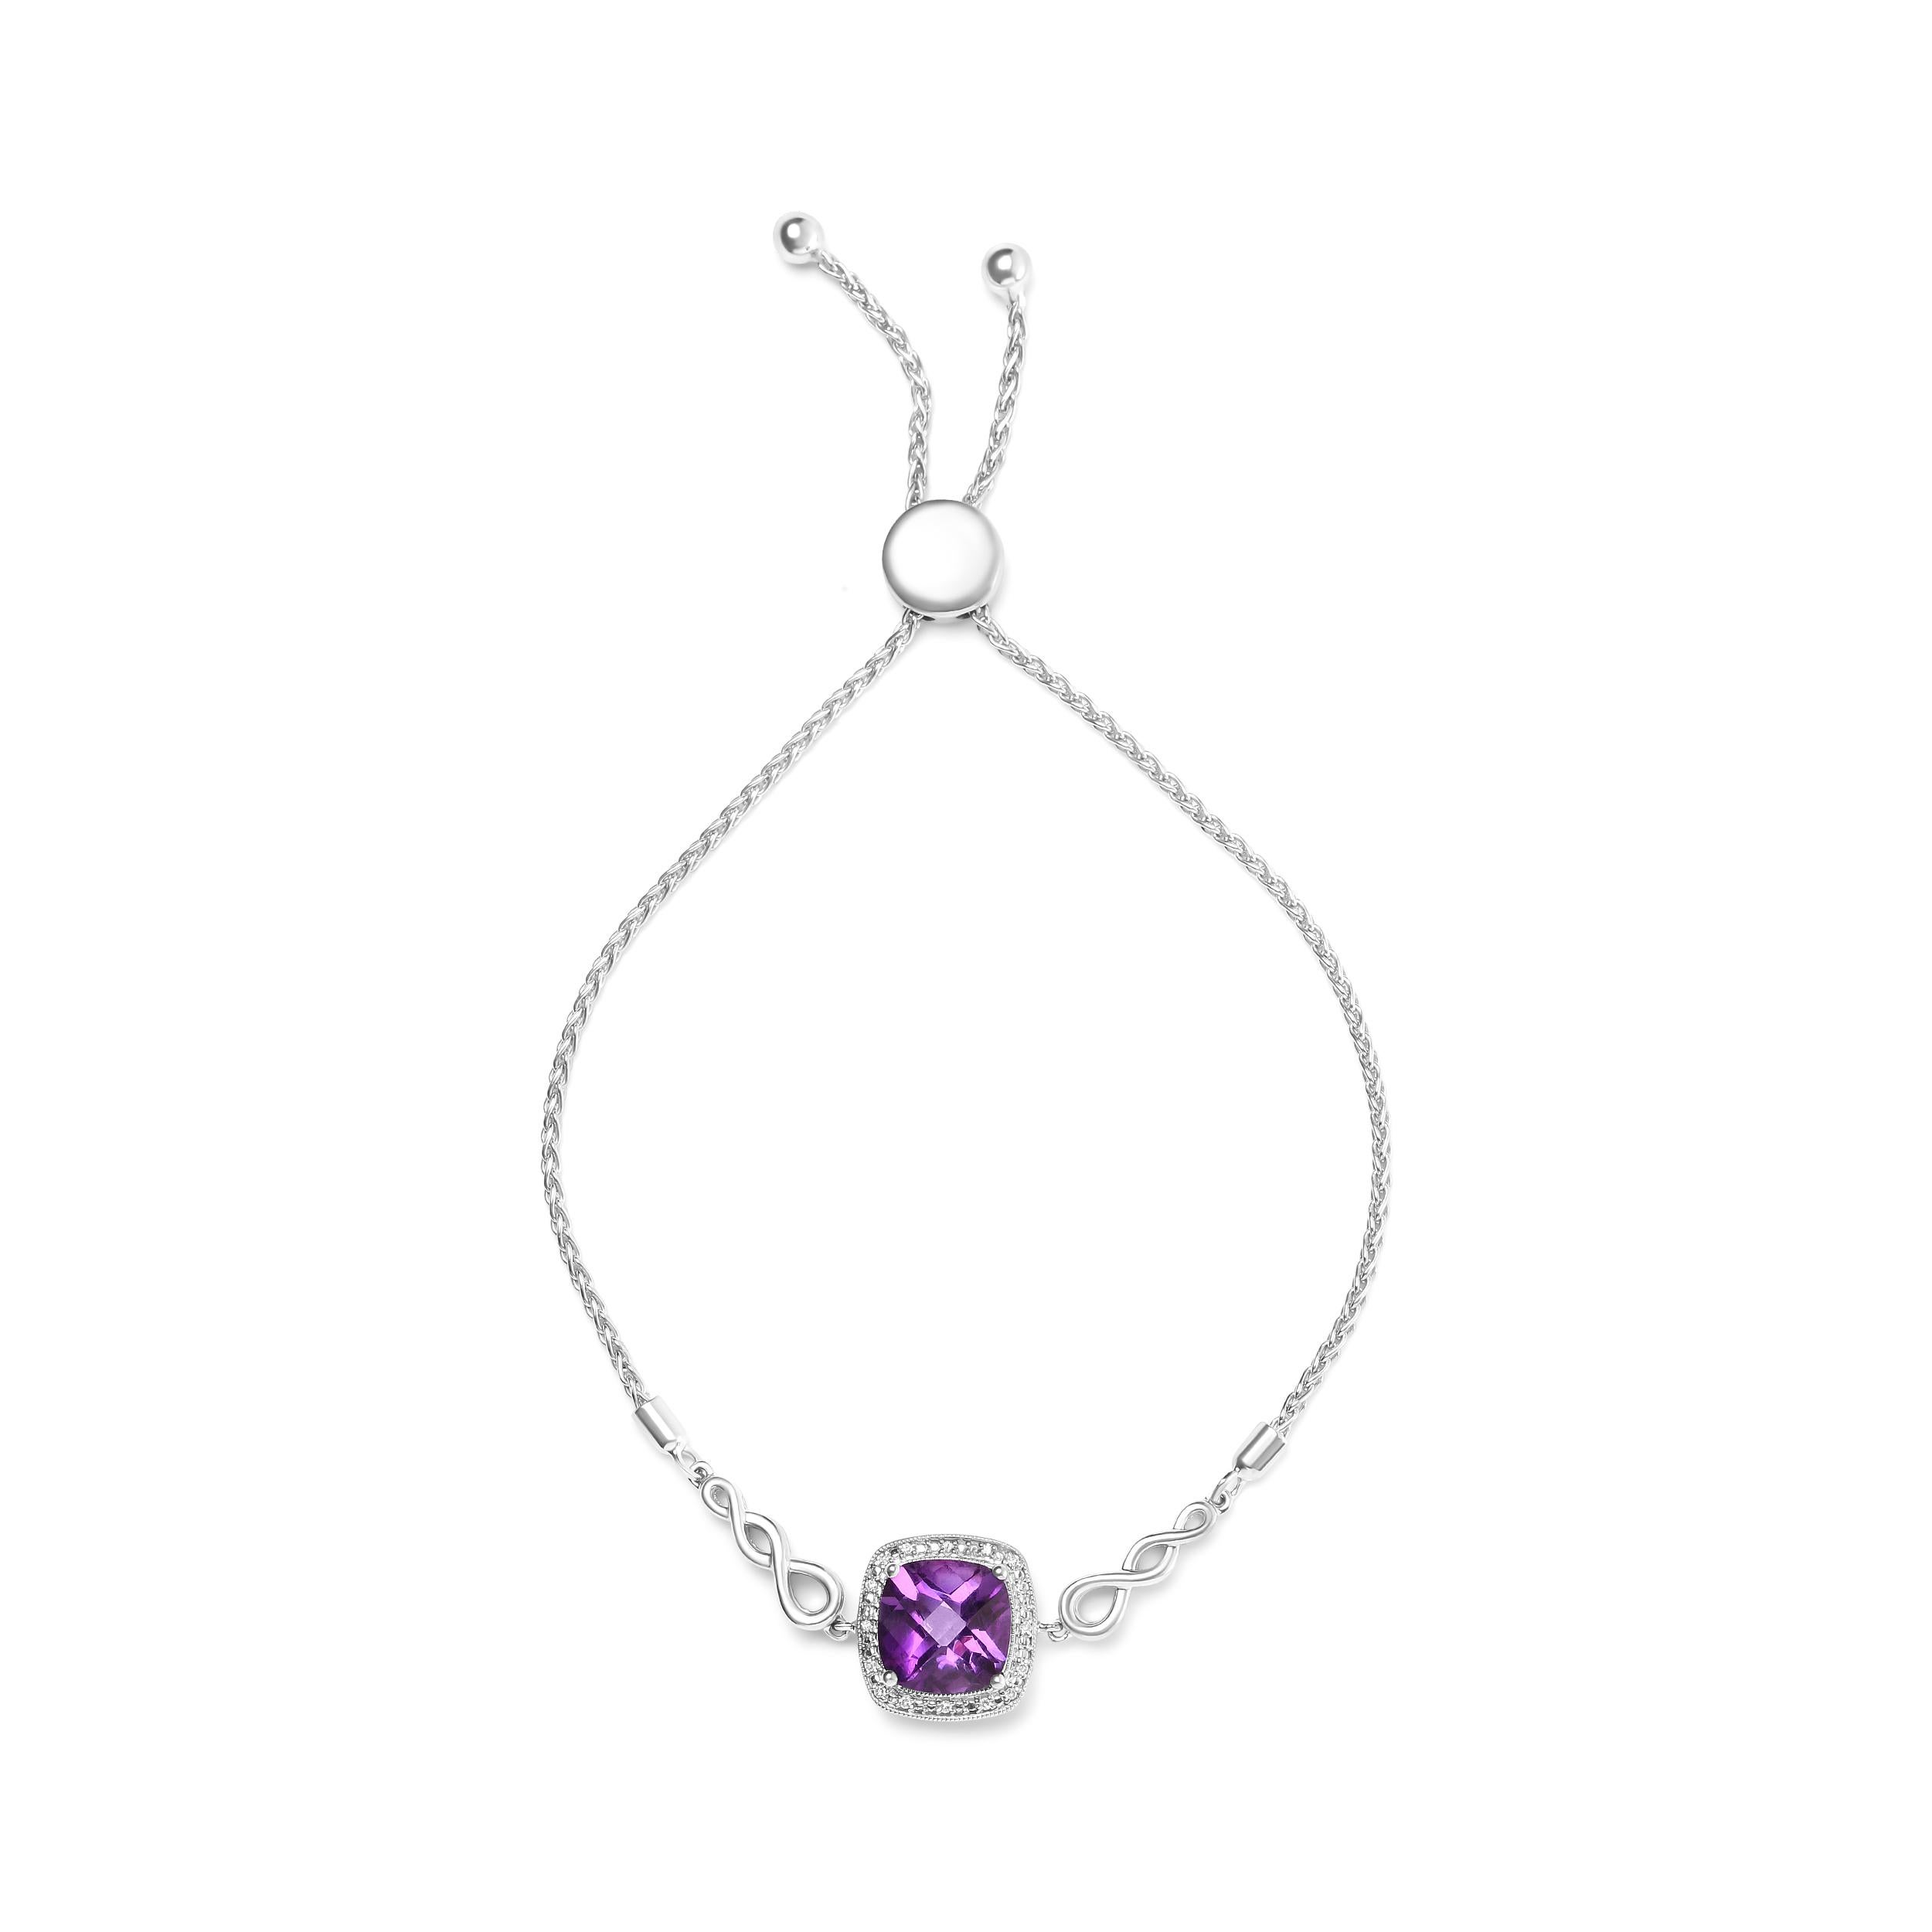 Indulge in the luxury of this exquisite lariat bracelet that captures the essence of elegance and sophistication. The centerpiece of this stunning bracelet is a gorgeous 10mm cushion-cut amethyst gemstone that adds a pop of regal purple color to